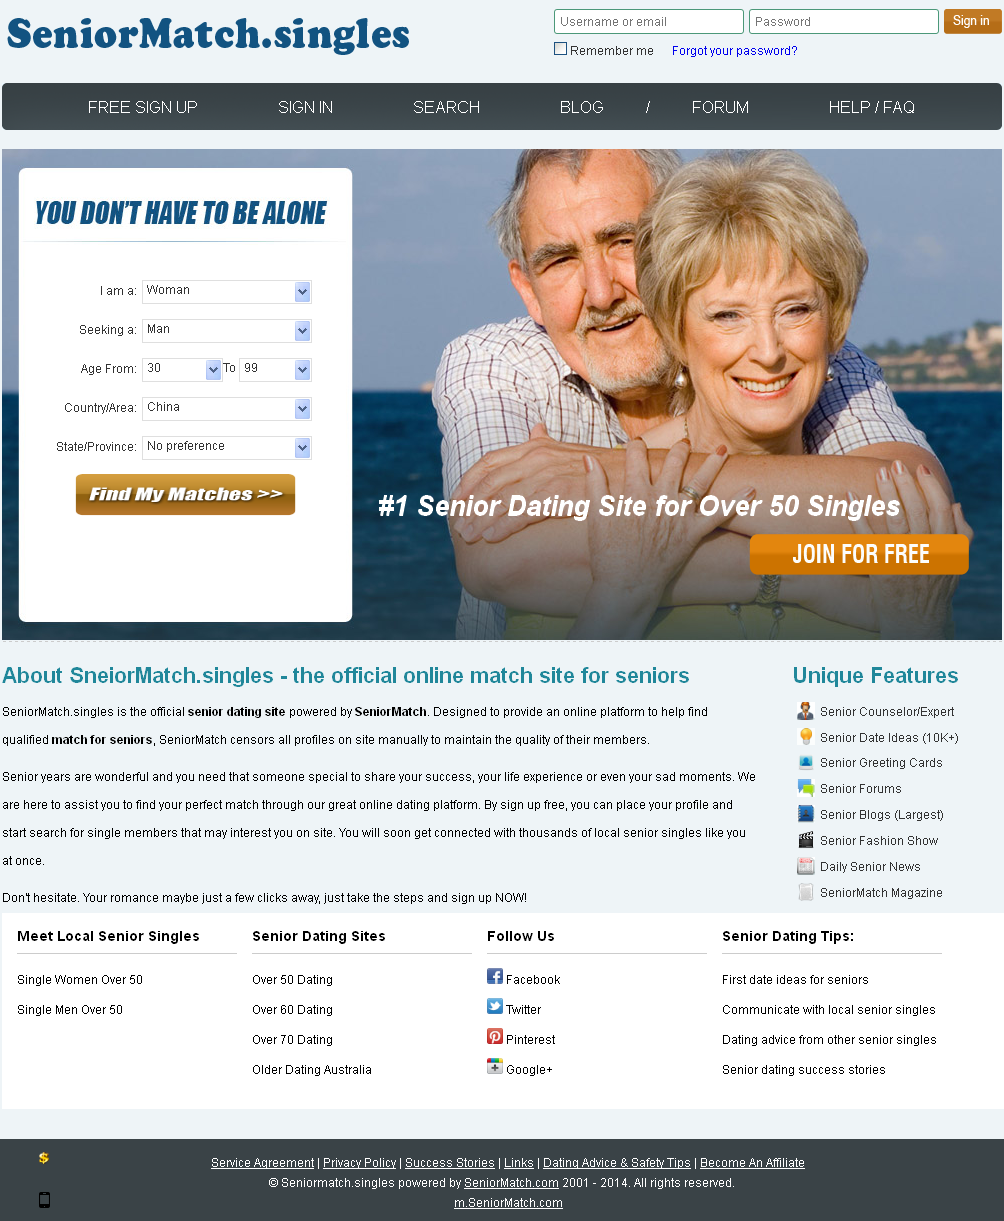 Are there any dating sites that are free for seniors?